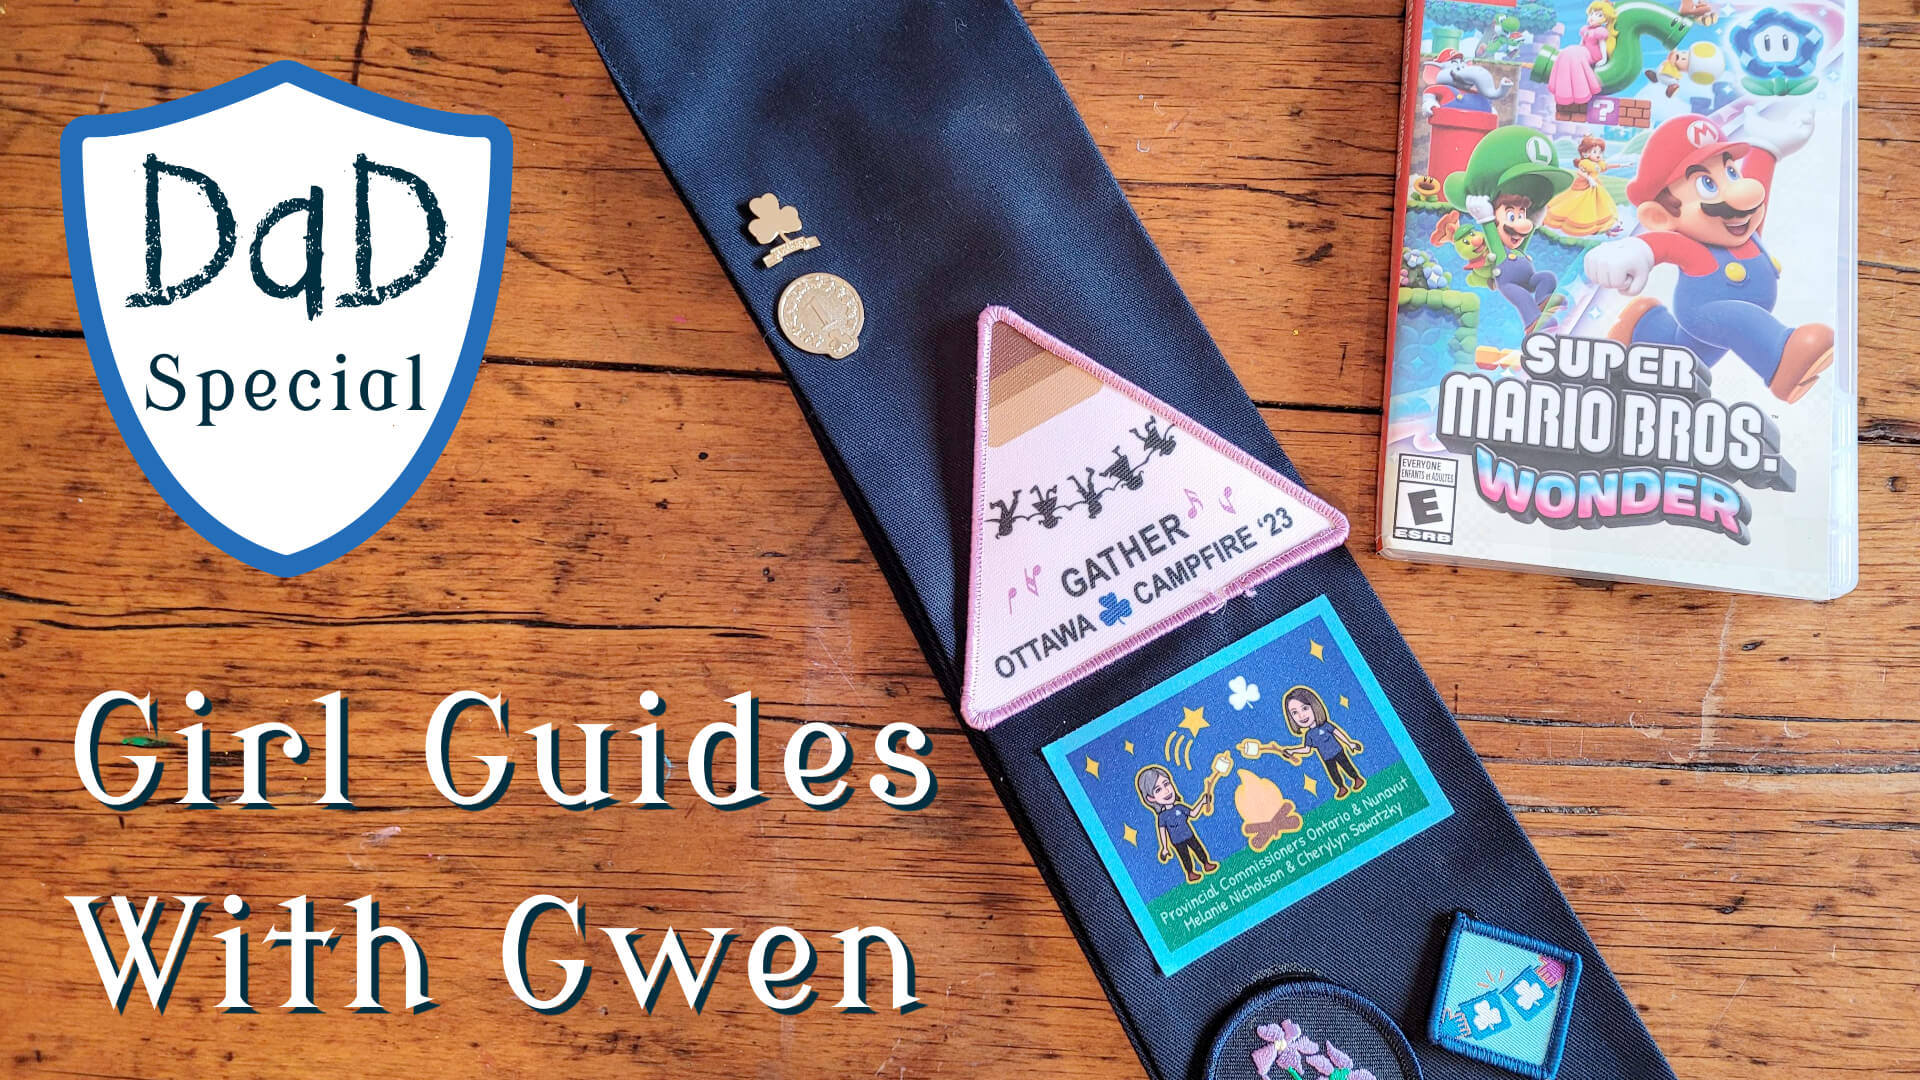 DaD Special – Girl Guides with Gwen